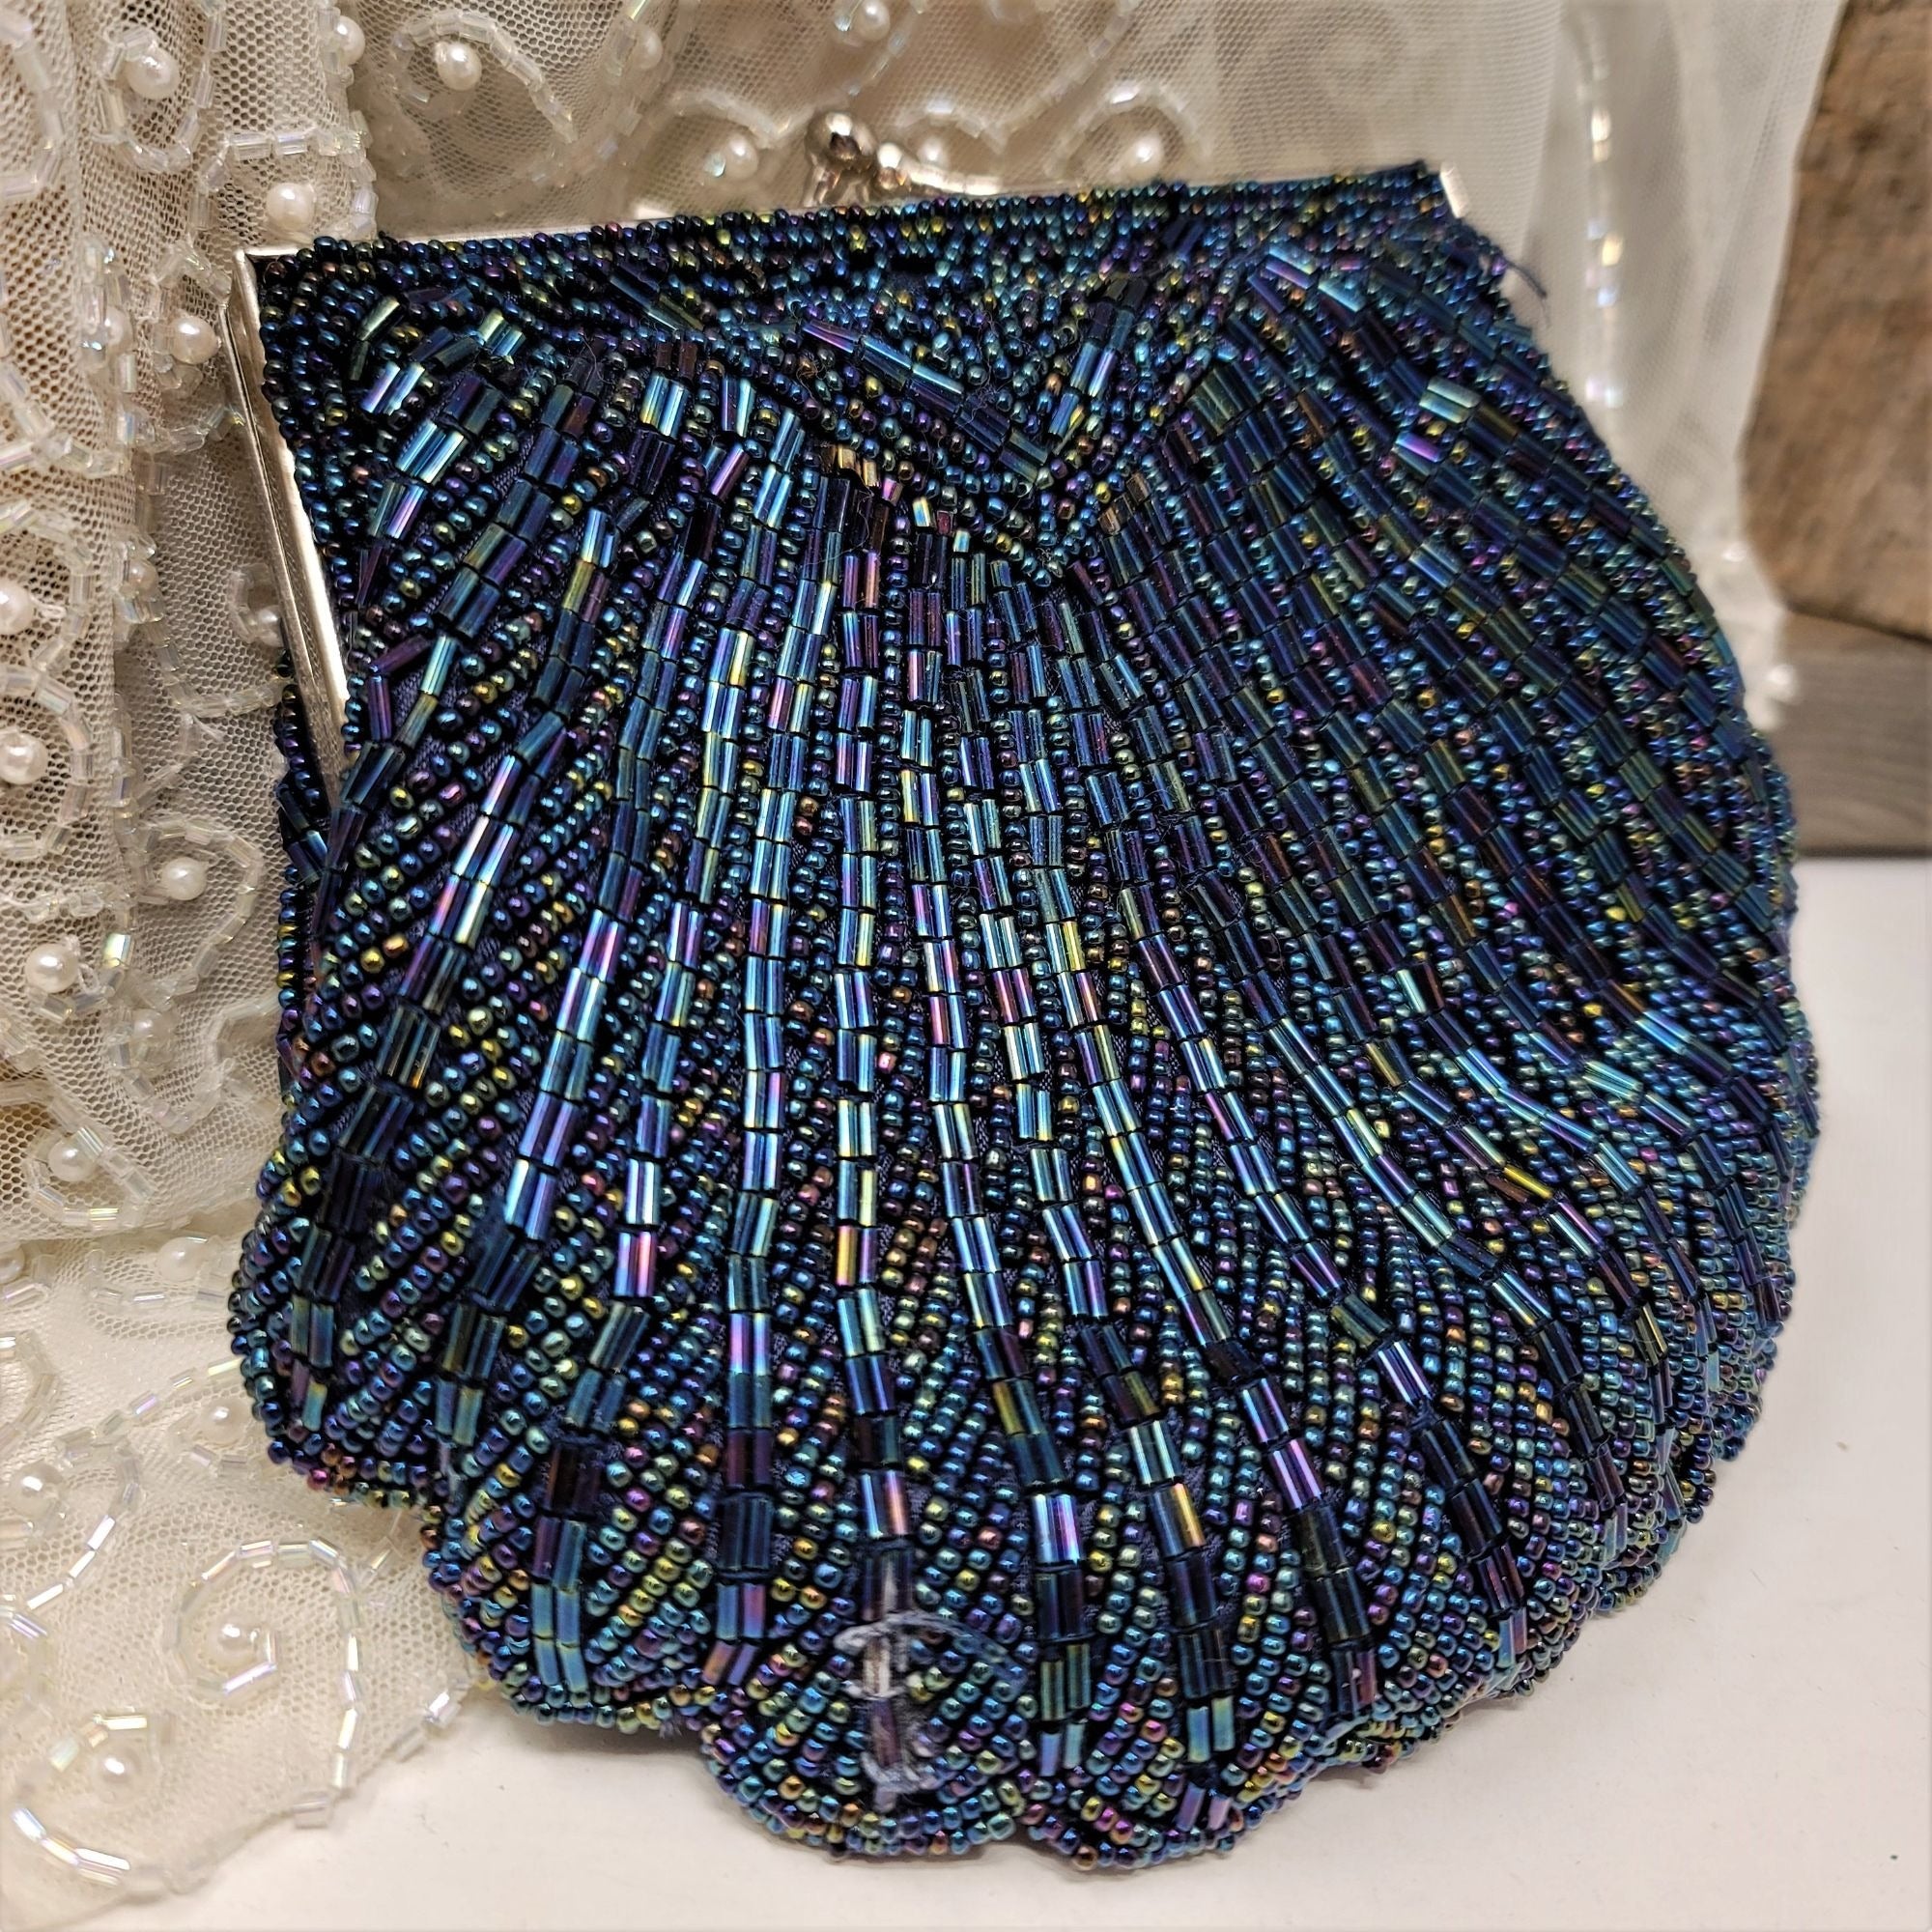 Vintage Clam Shell Beaded Bag by Carla Marchi Peacock Blue